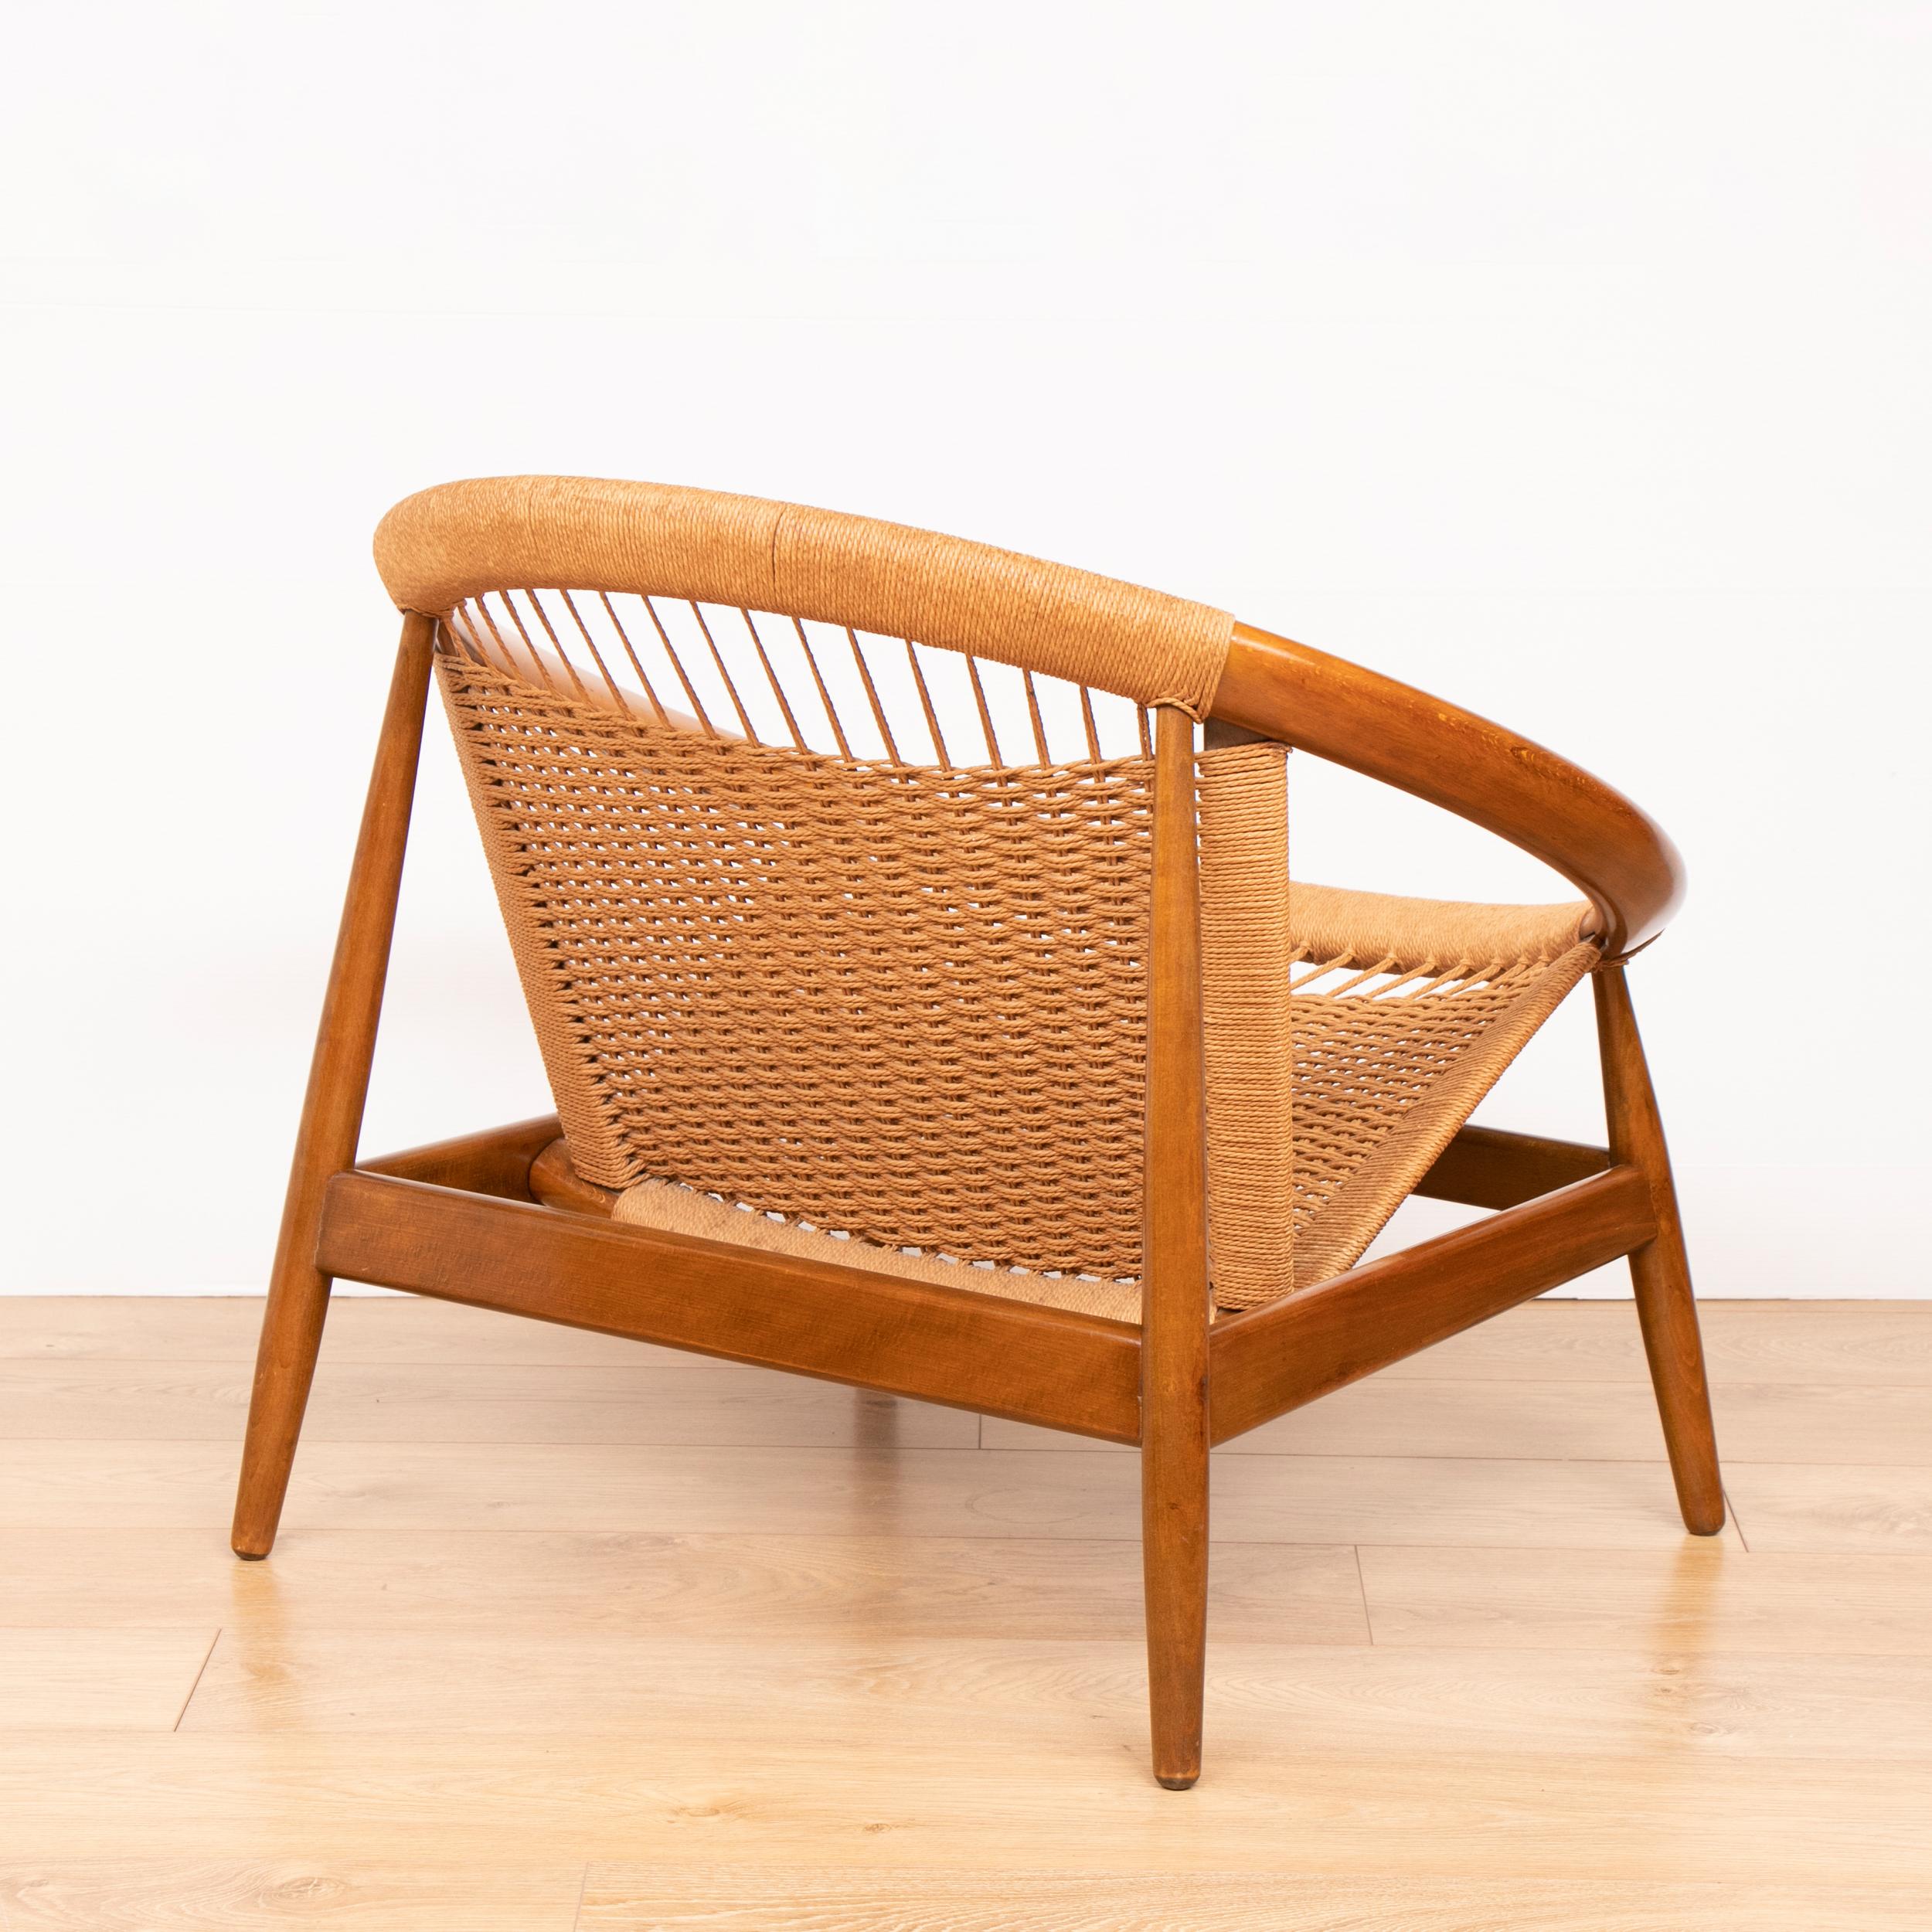 Danish Mcentury Illum Wikkelso Ringstol Teak and Woven Cord model 23 Chair In Good Condition For Sale In Surbiton, GB